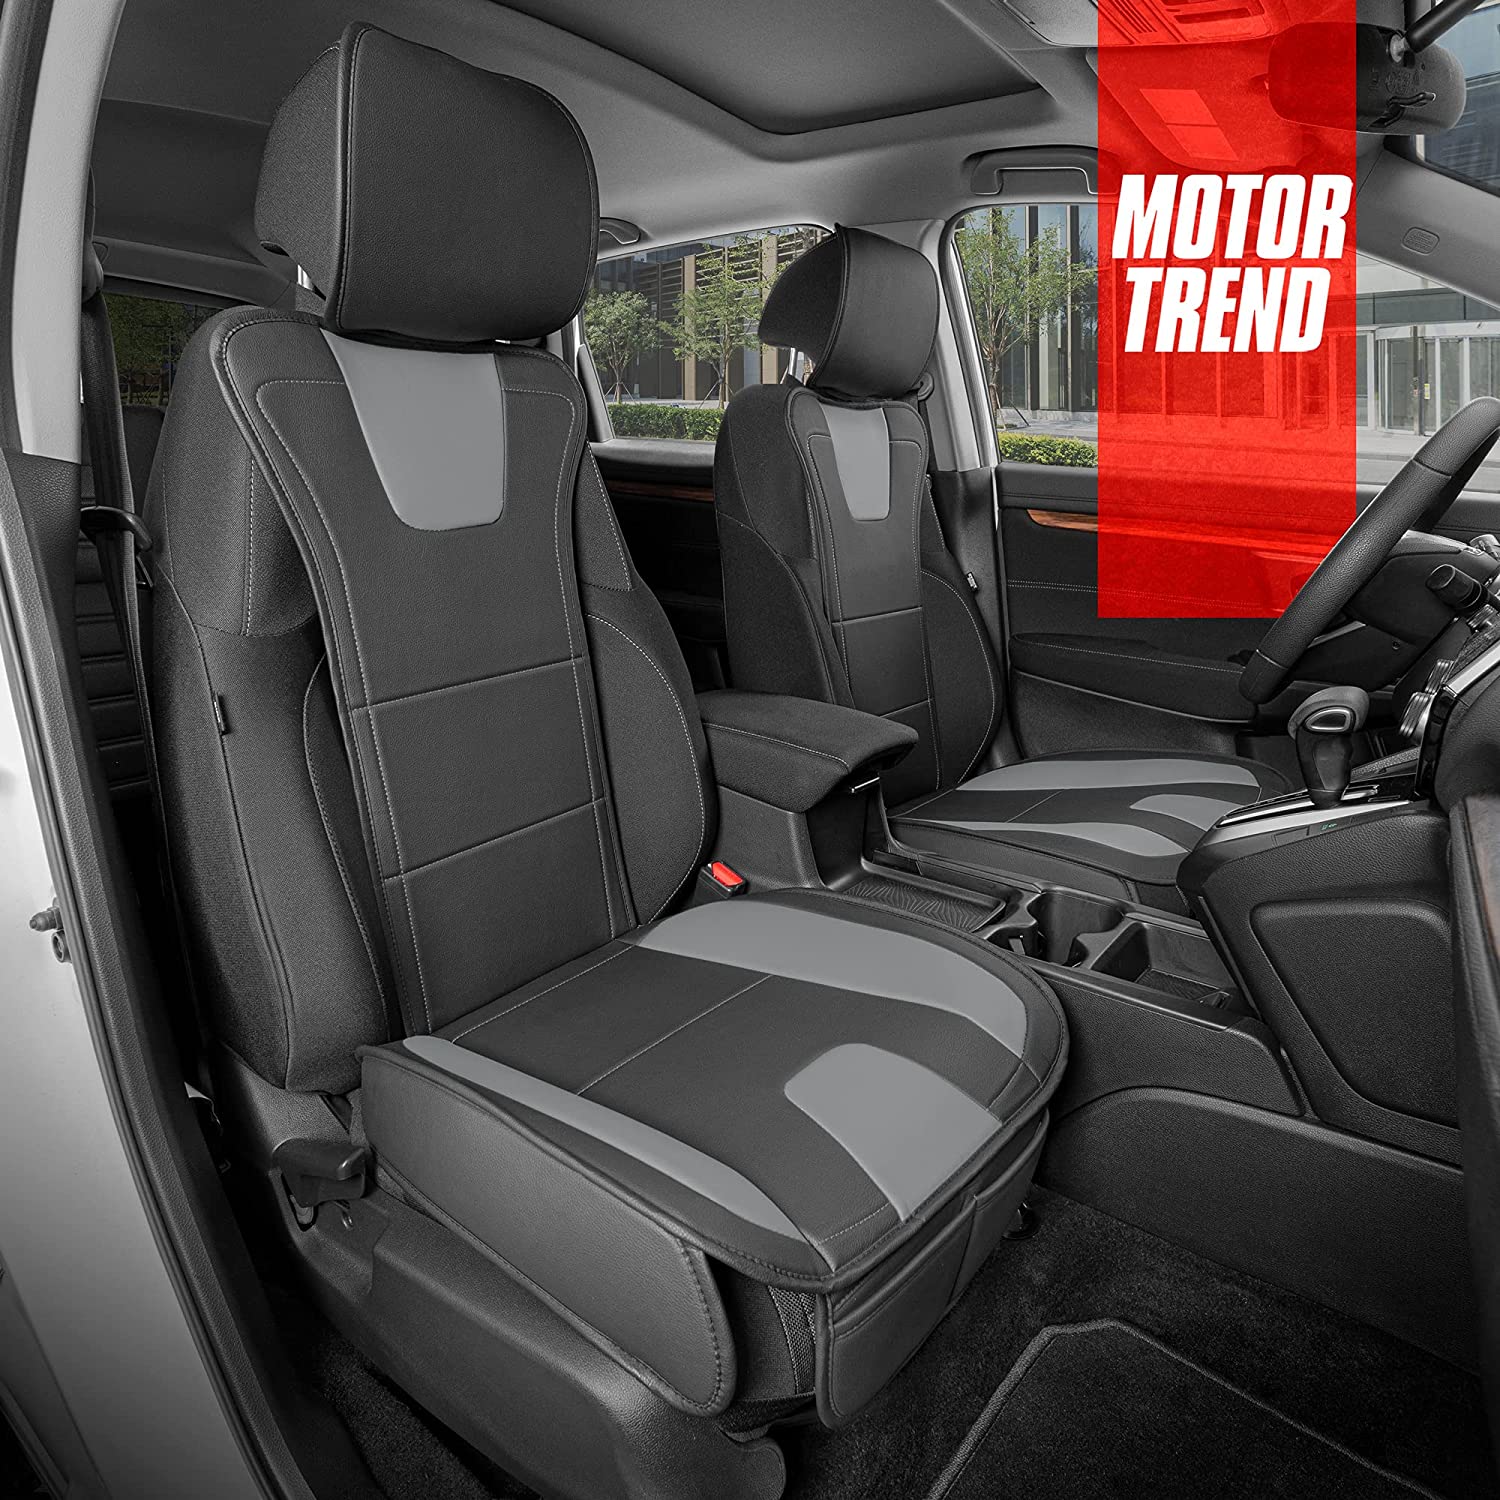 Motor Trend DuraLuxe Faux Gray Leather Car Seat Covers, 2 Piece Set